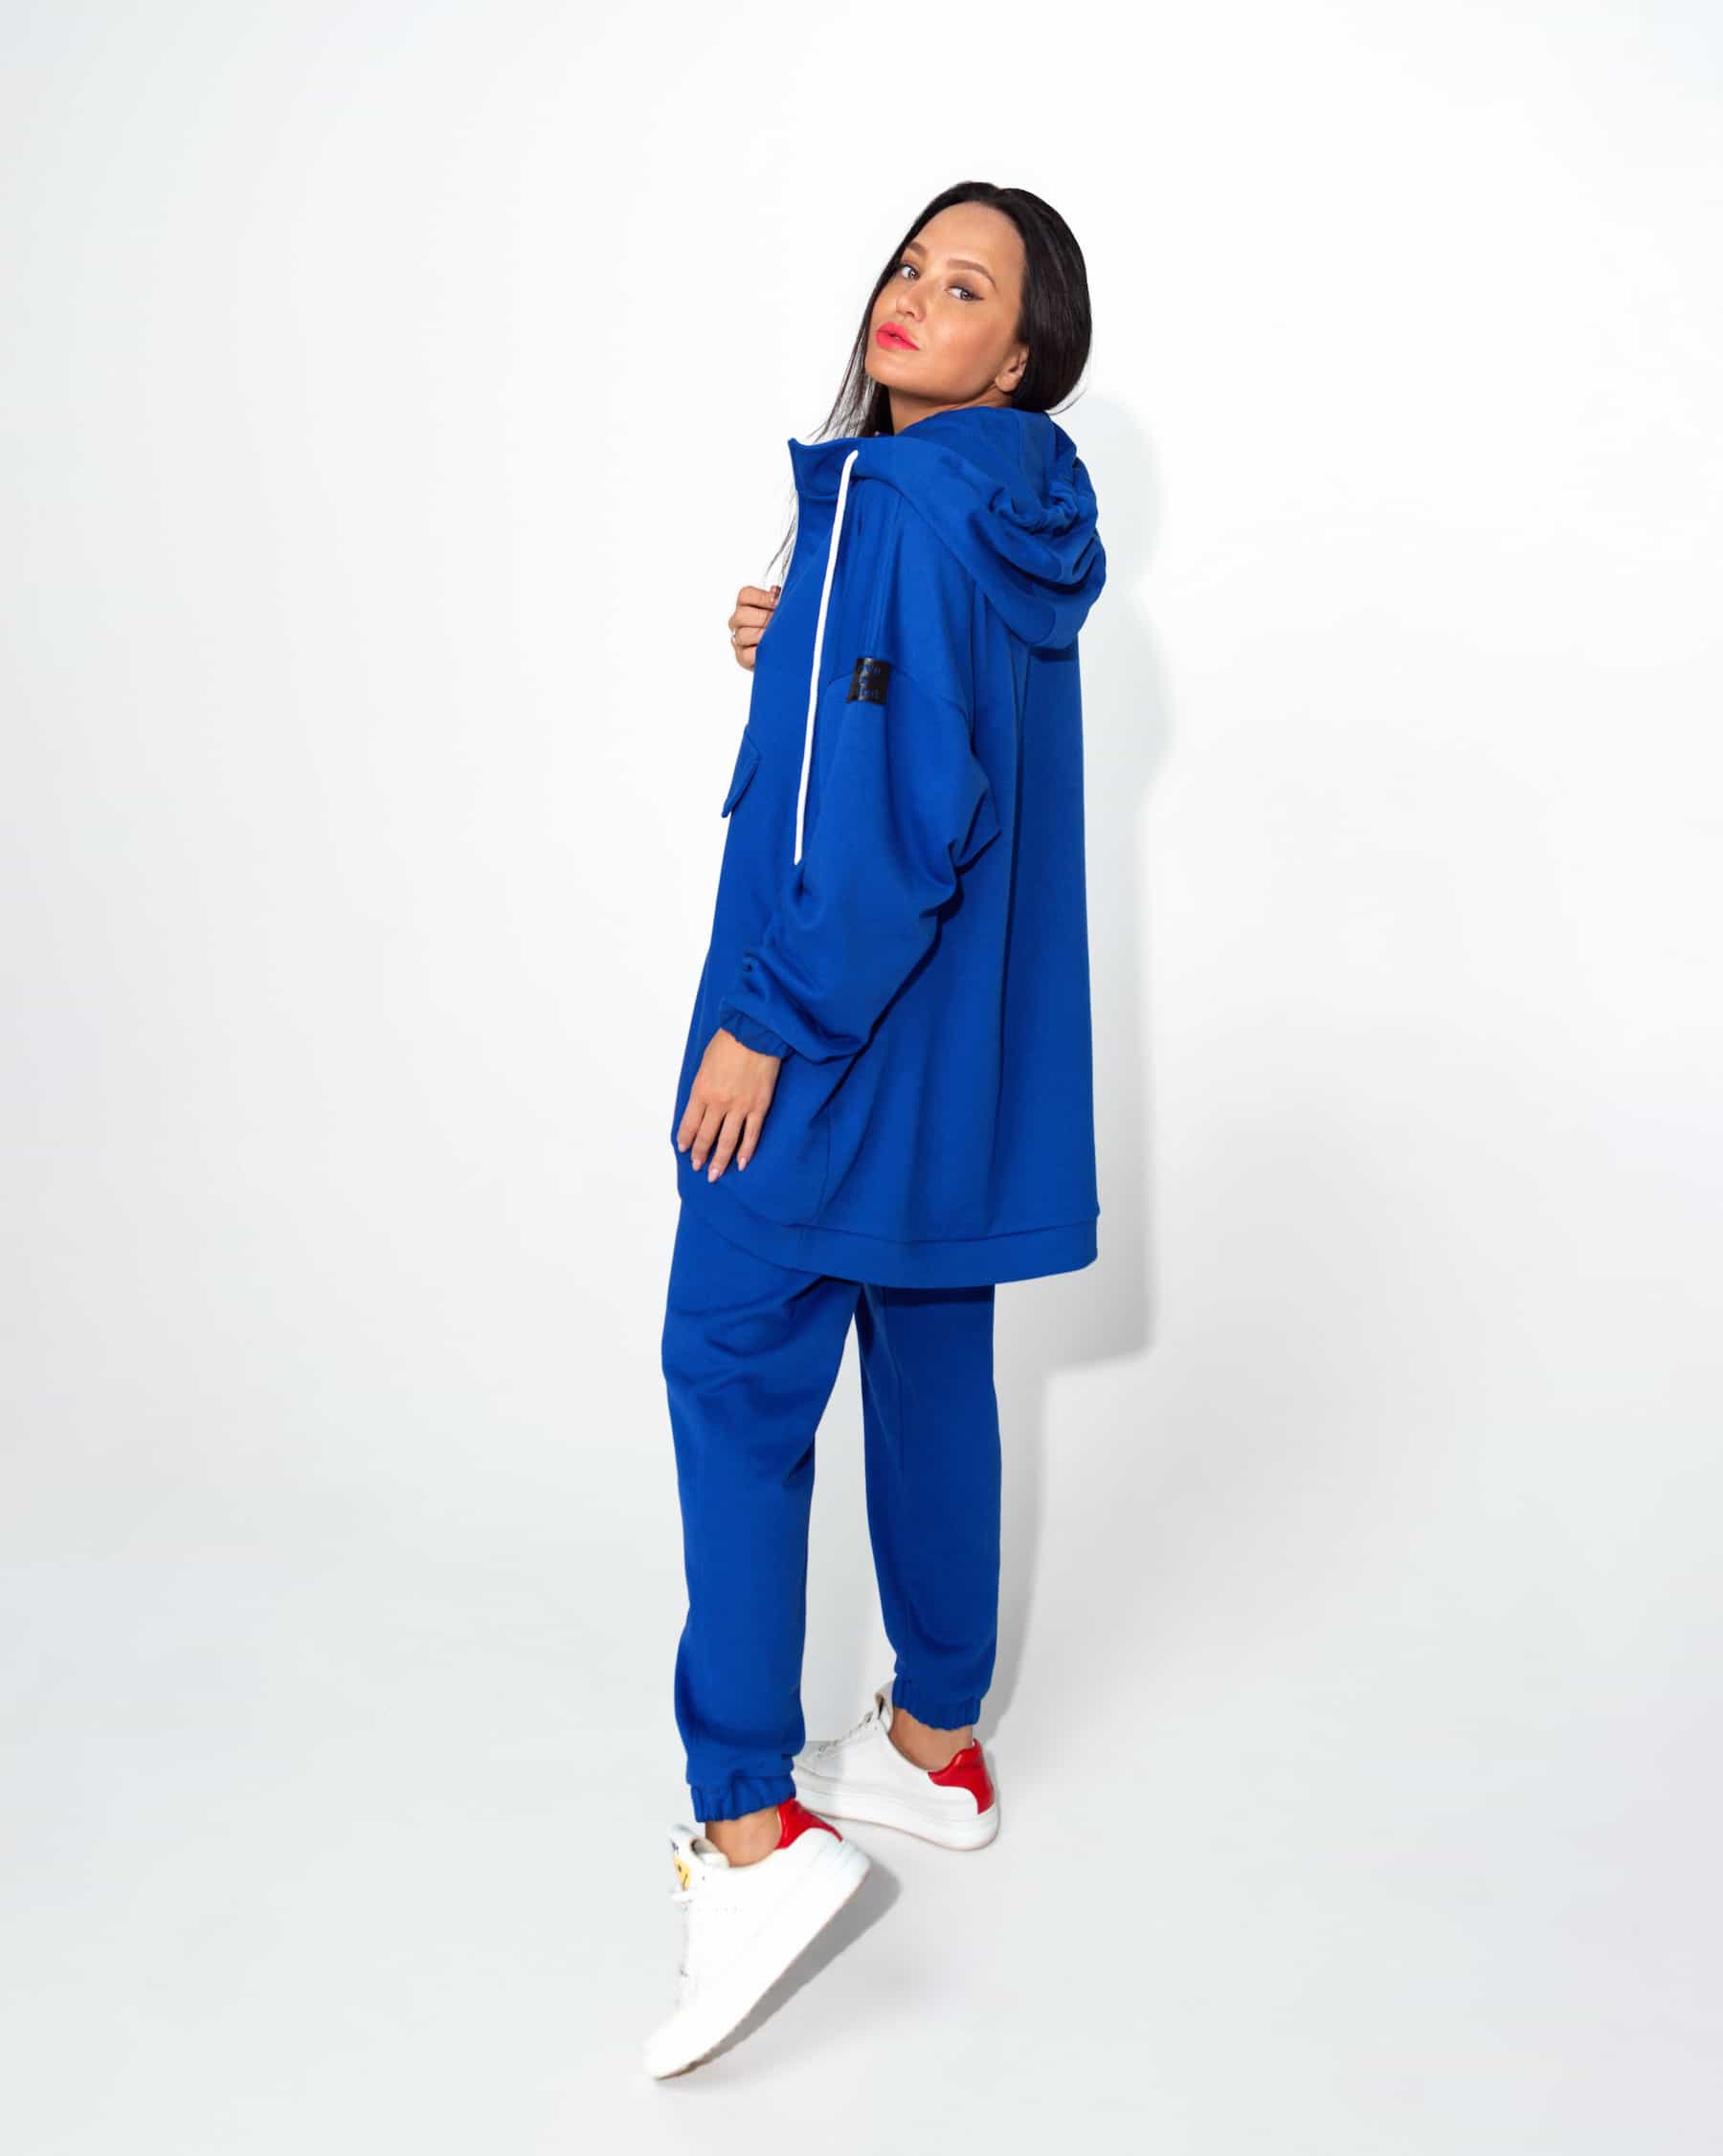 Sports suit in electric blue color.